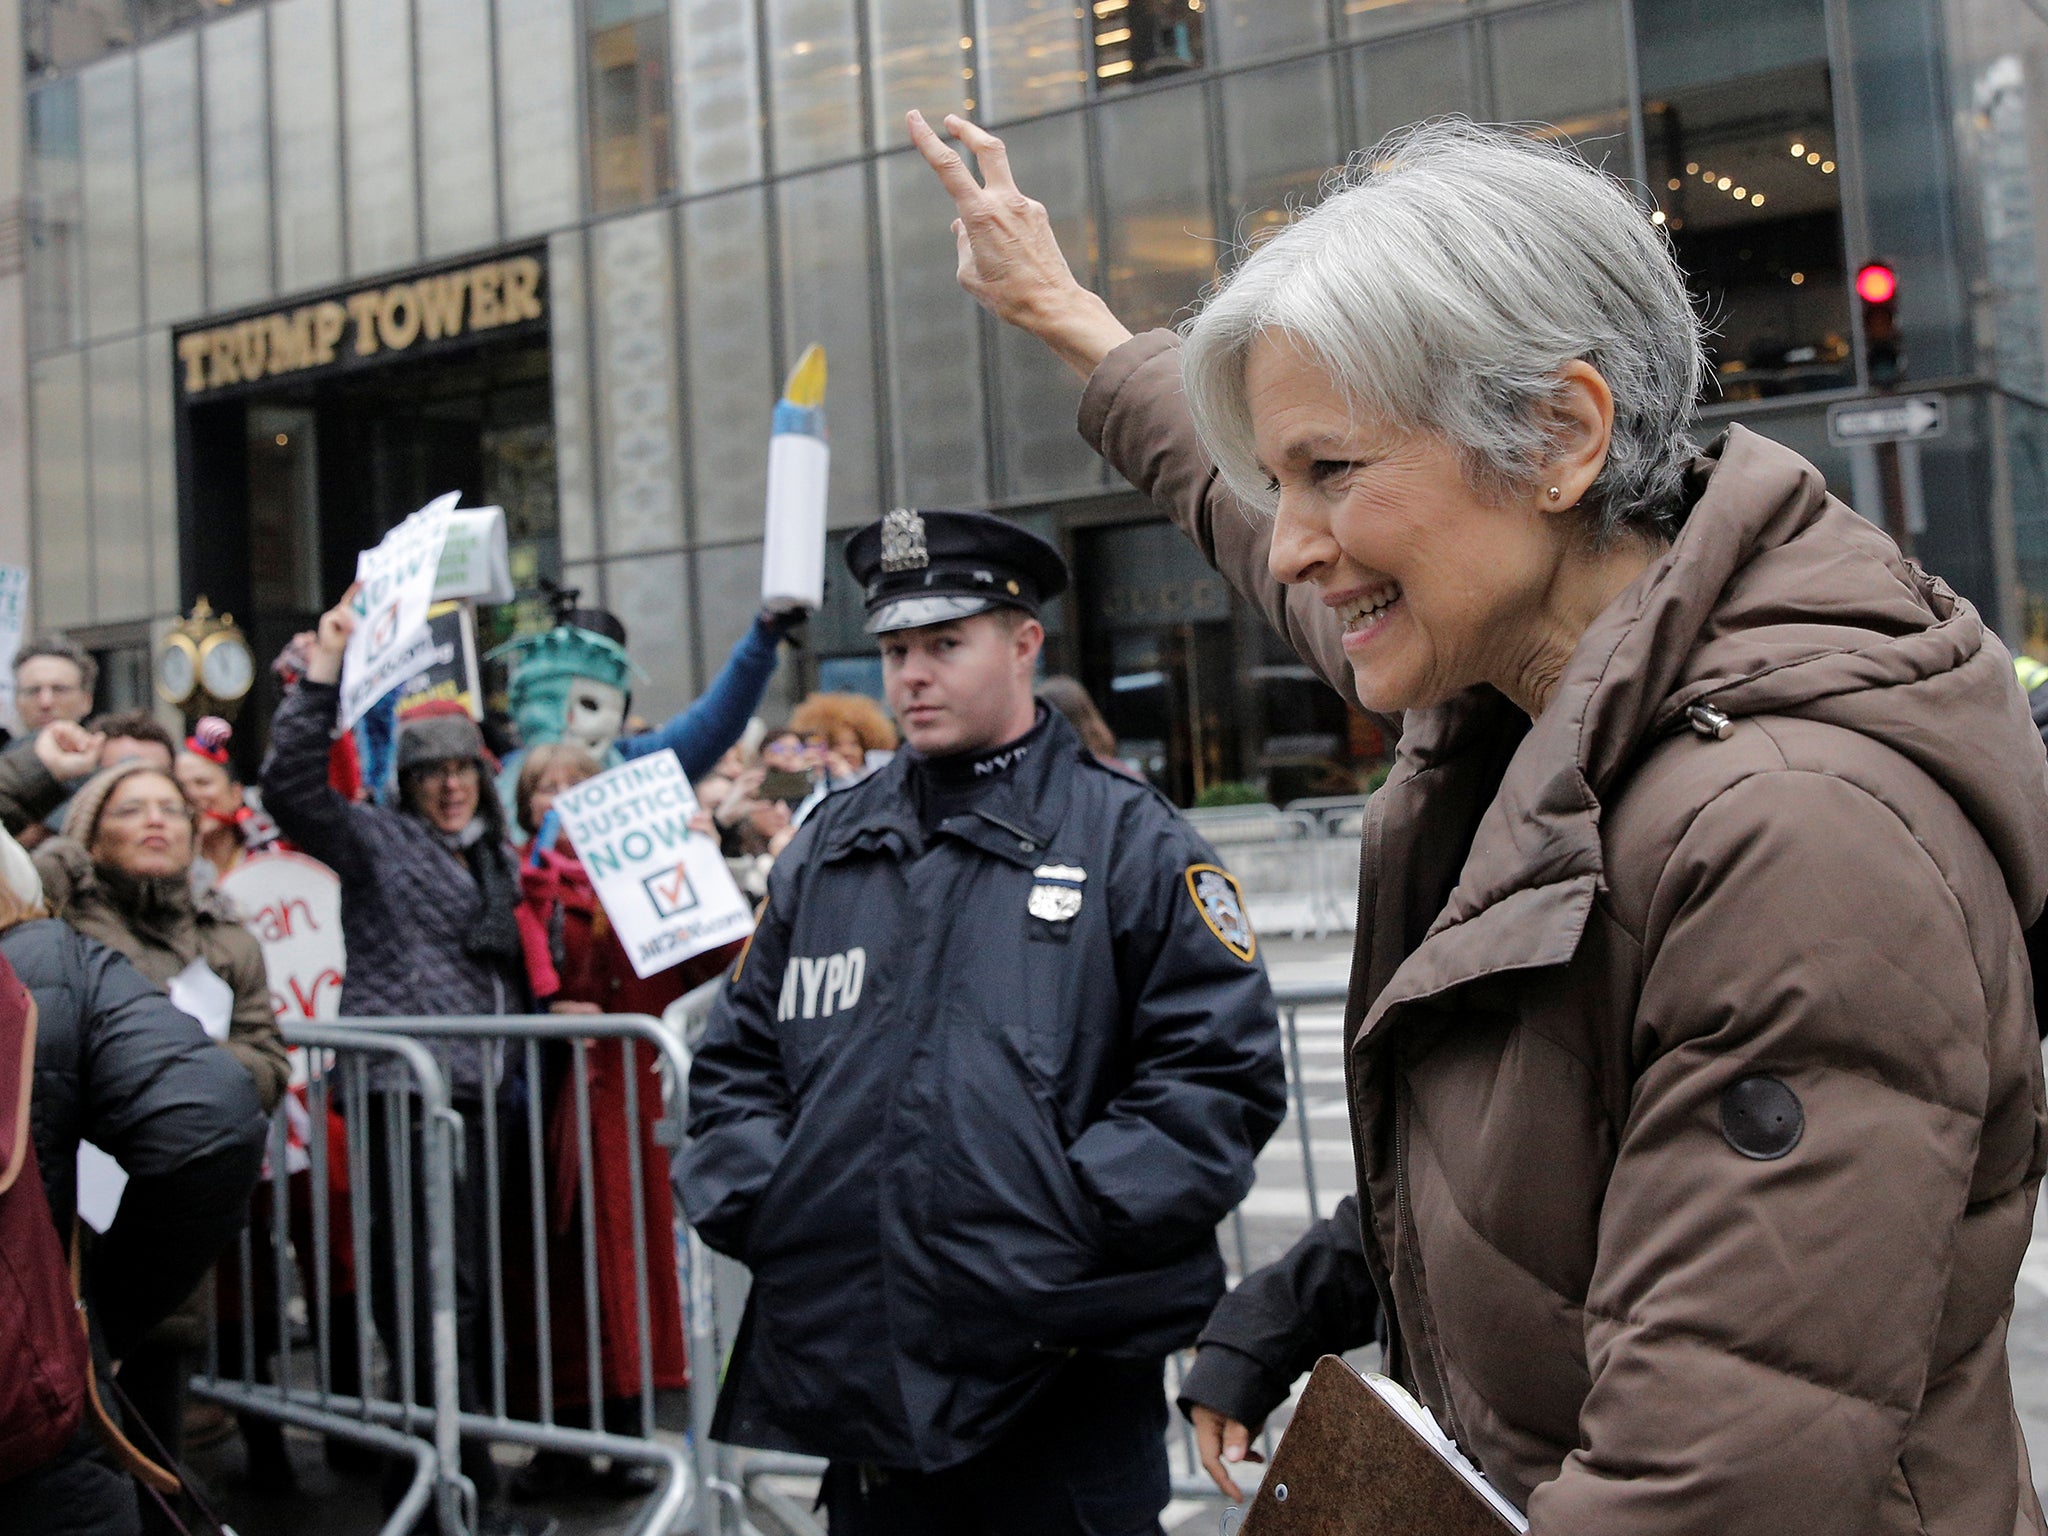 Green Party presidential nominee Jill Stein waves to supporters as she leaves a news conference outside Trump Tower in Manhattan, New York City